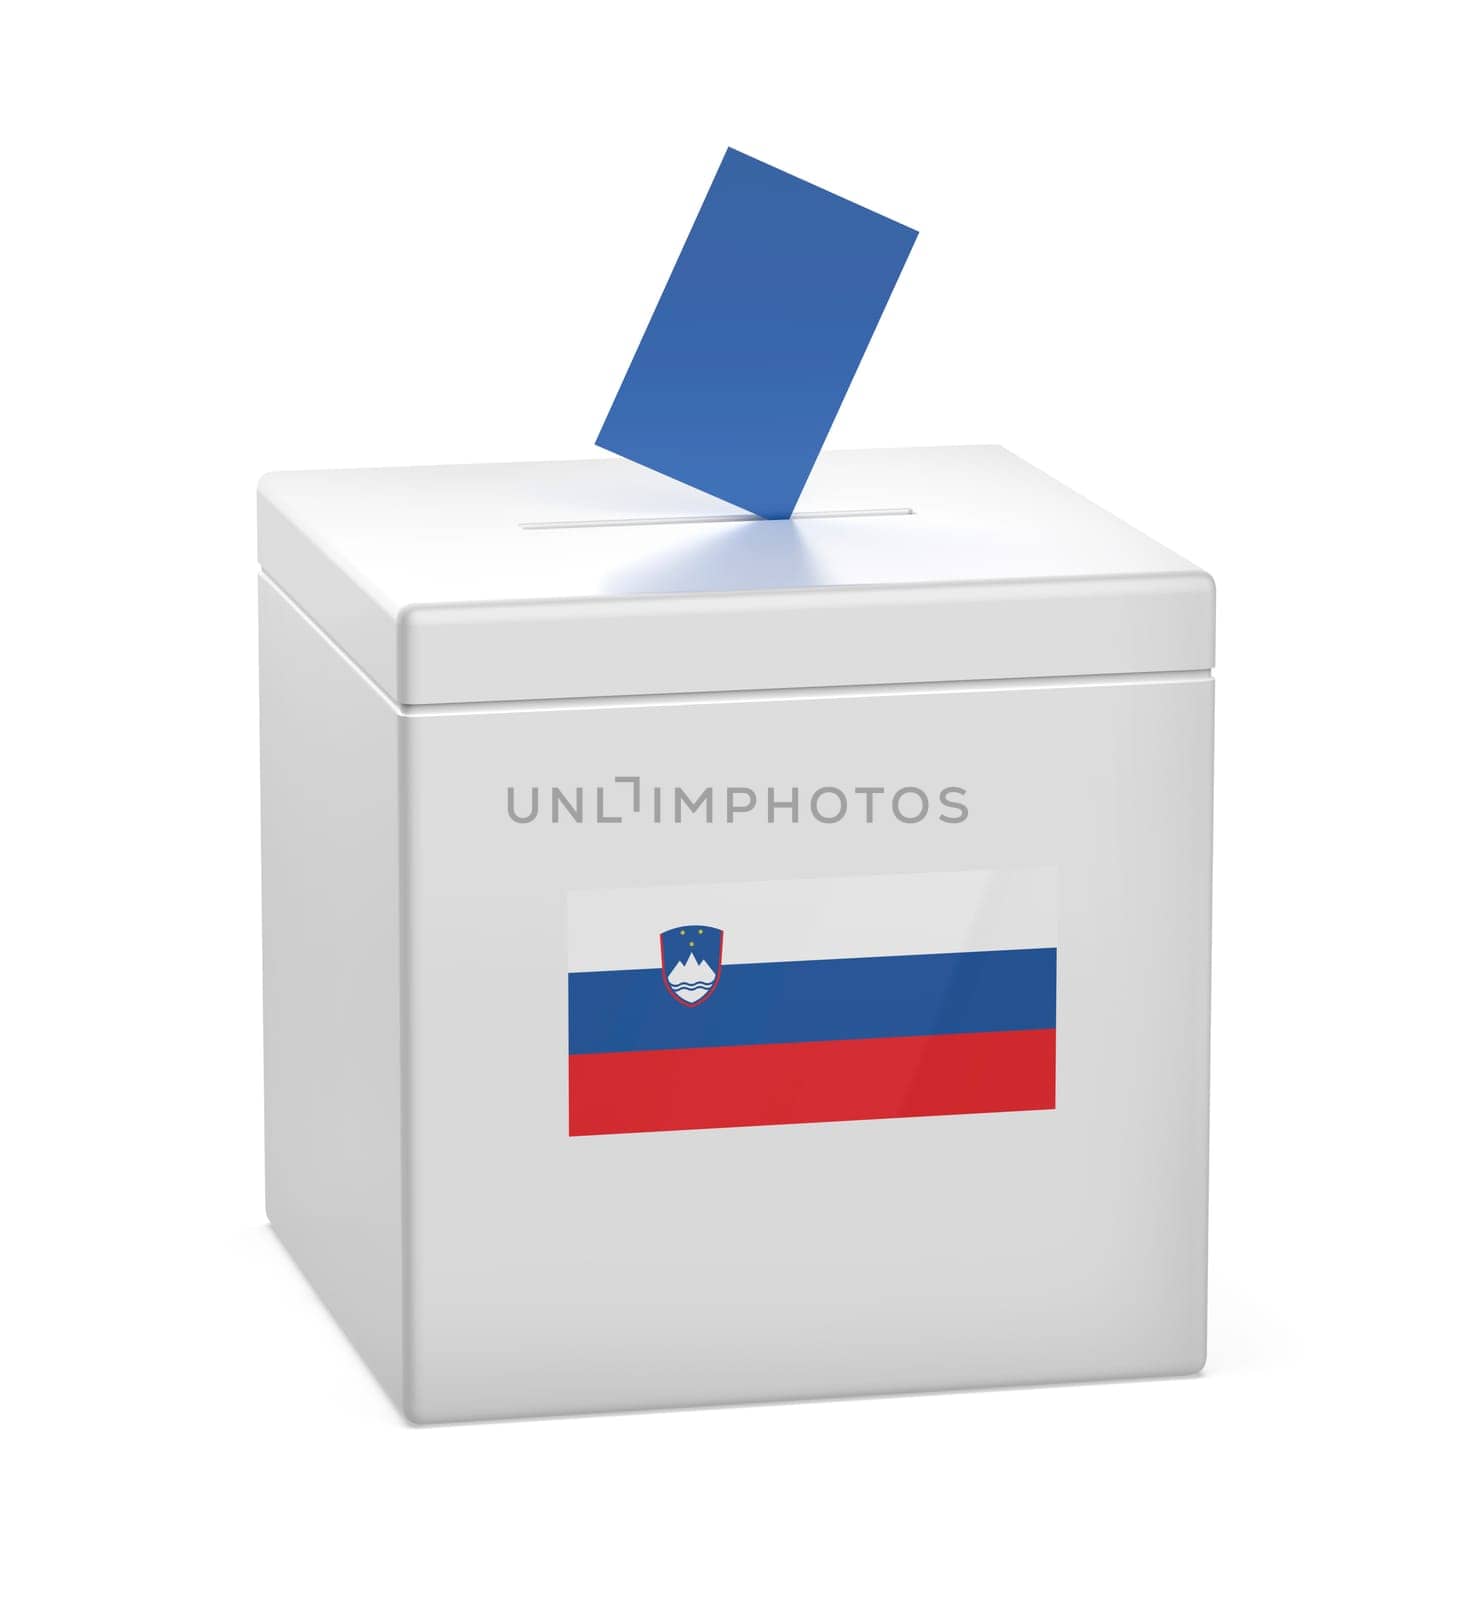 Concept image for elections in Slovenia by magraphics